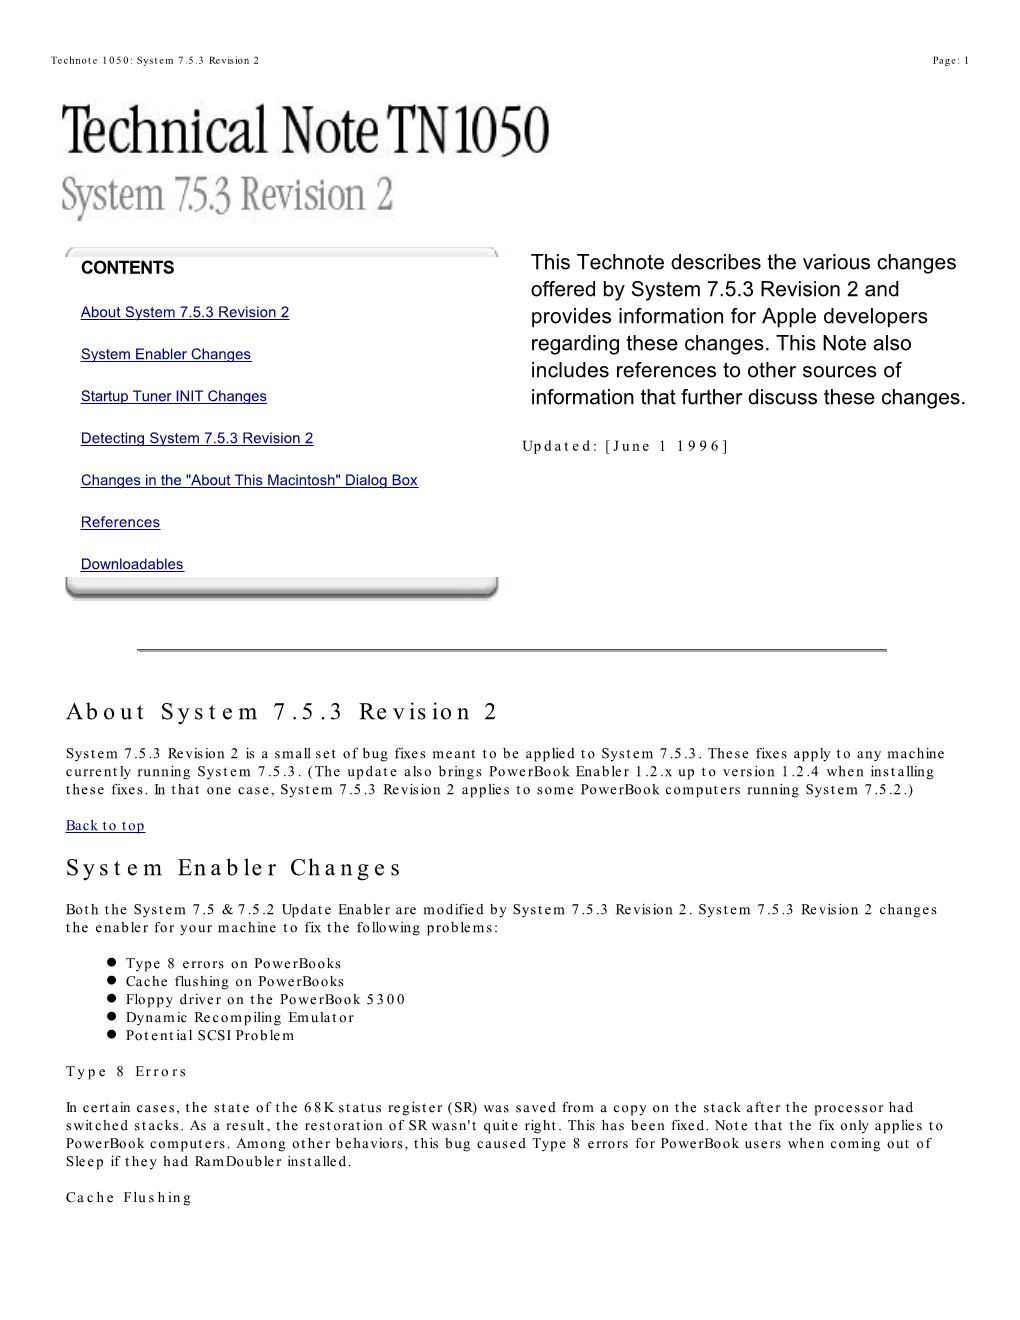 About System 7.5.3 Revision 2 System Enabler Changes